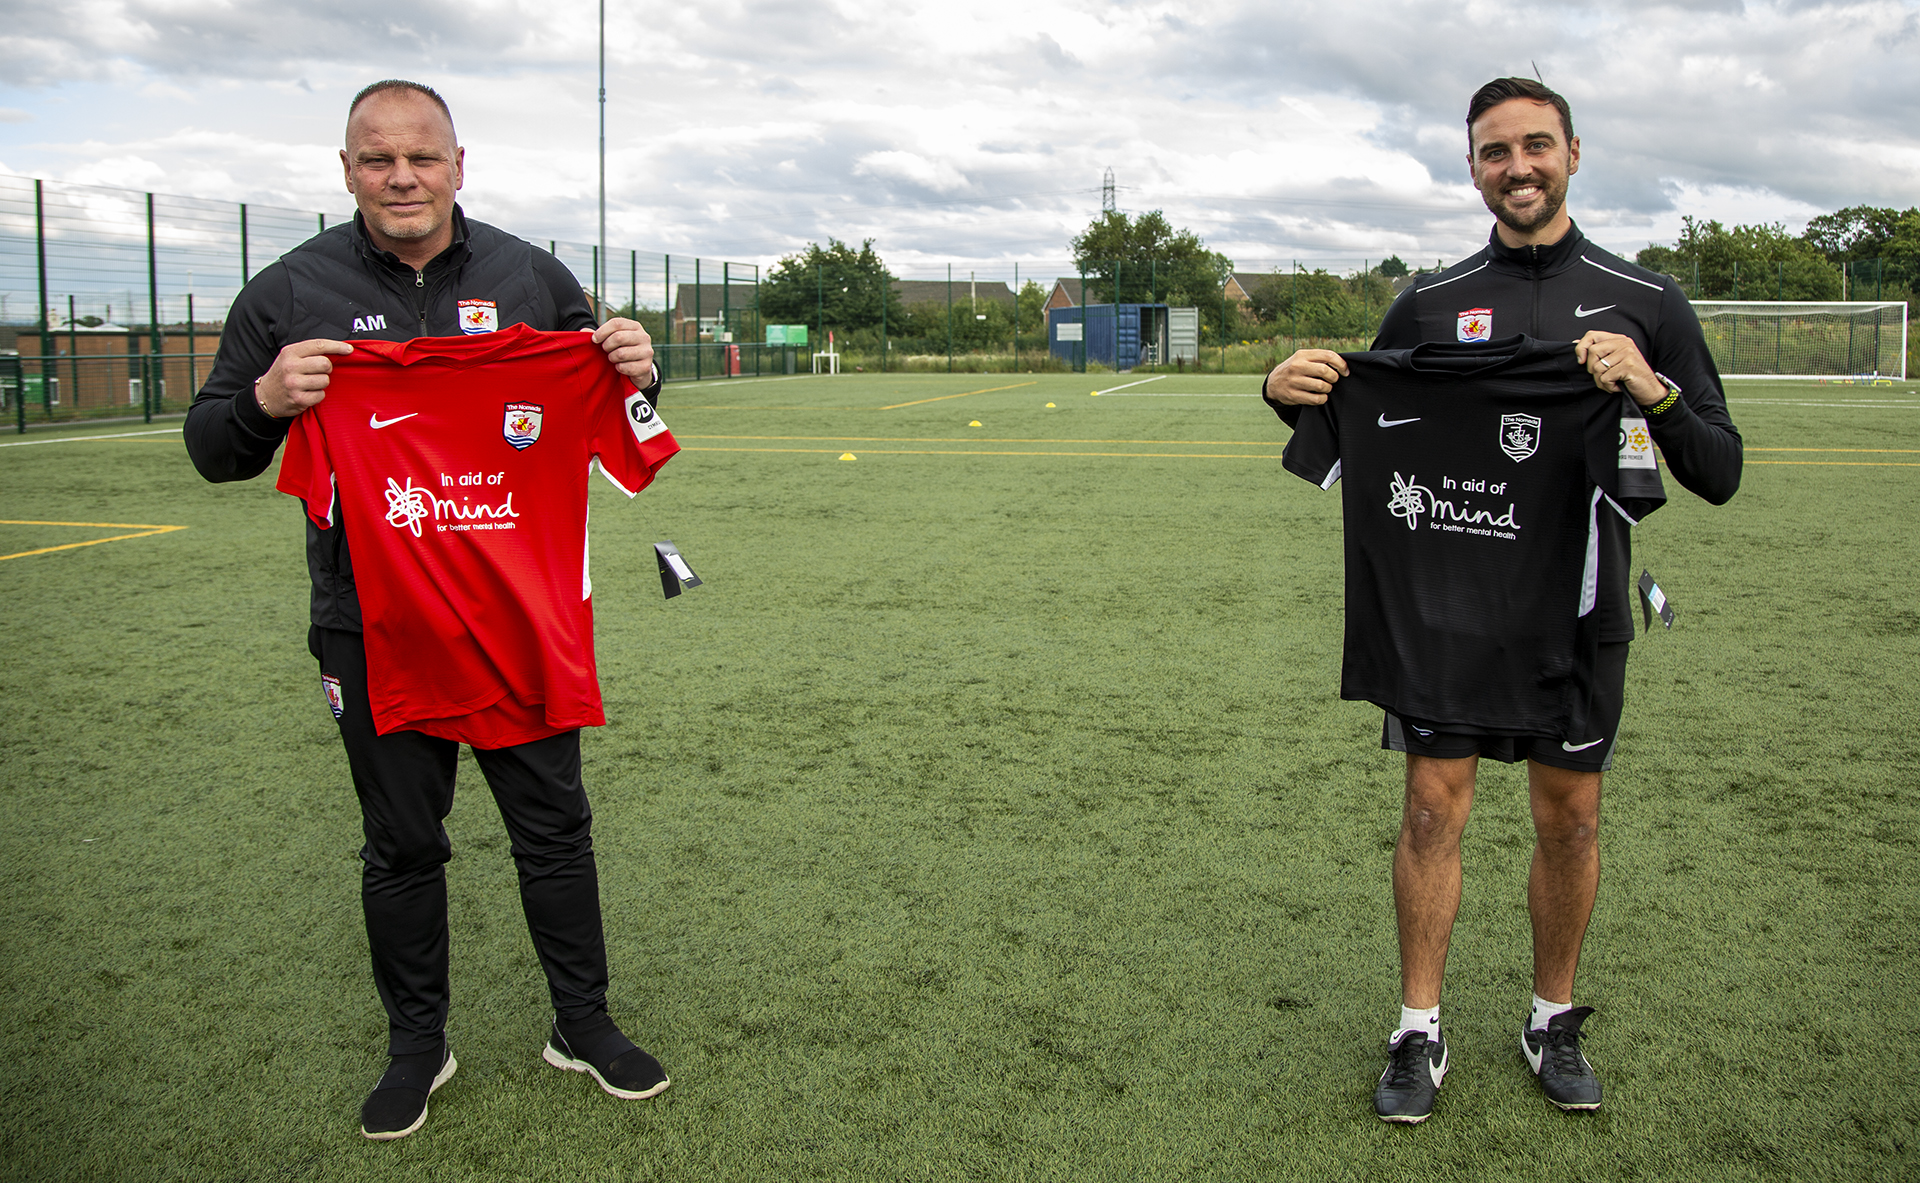 Manager Andy Morrison with Director of Football Jay Catton displaying the new shirts | © NCM Media